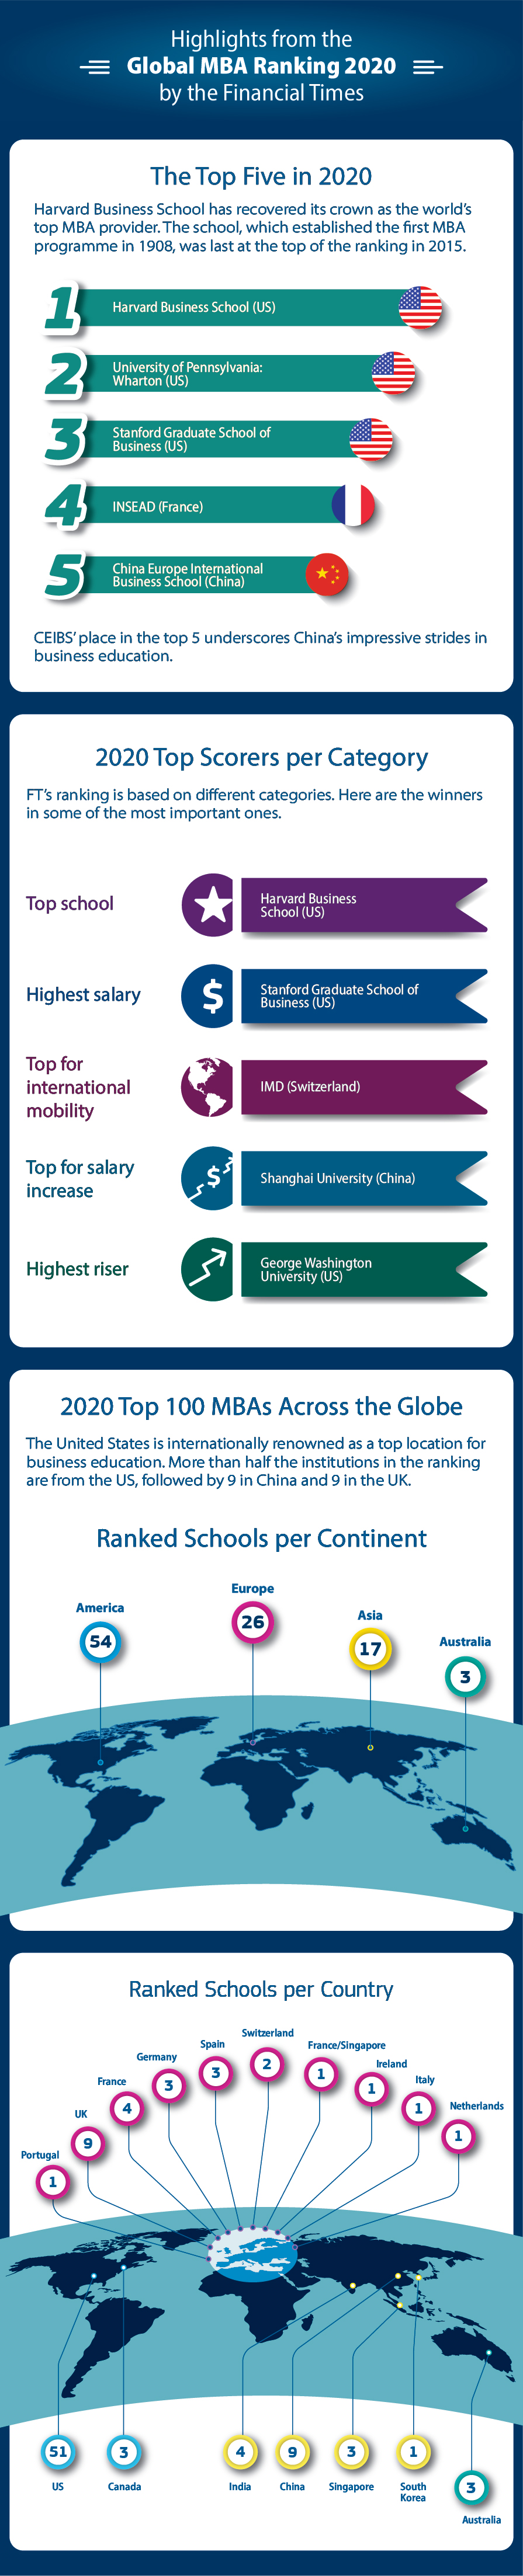 The FT Global MBA Ranking 2020: A Change at the Top